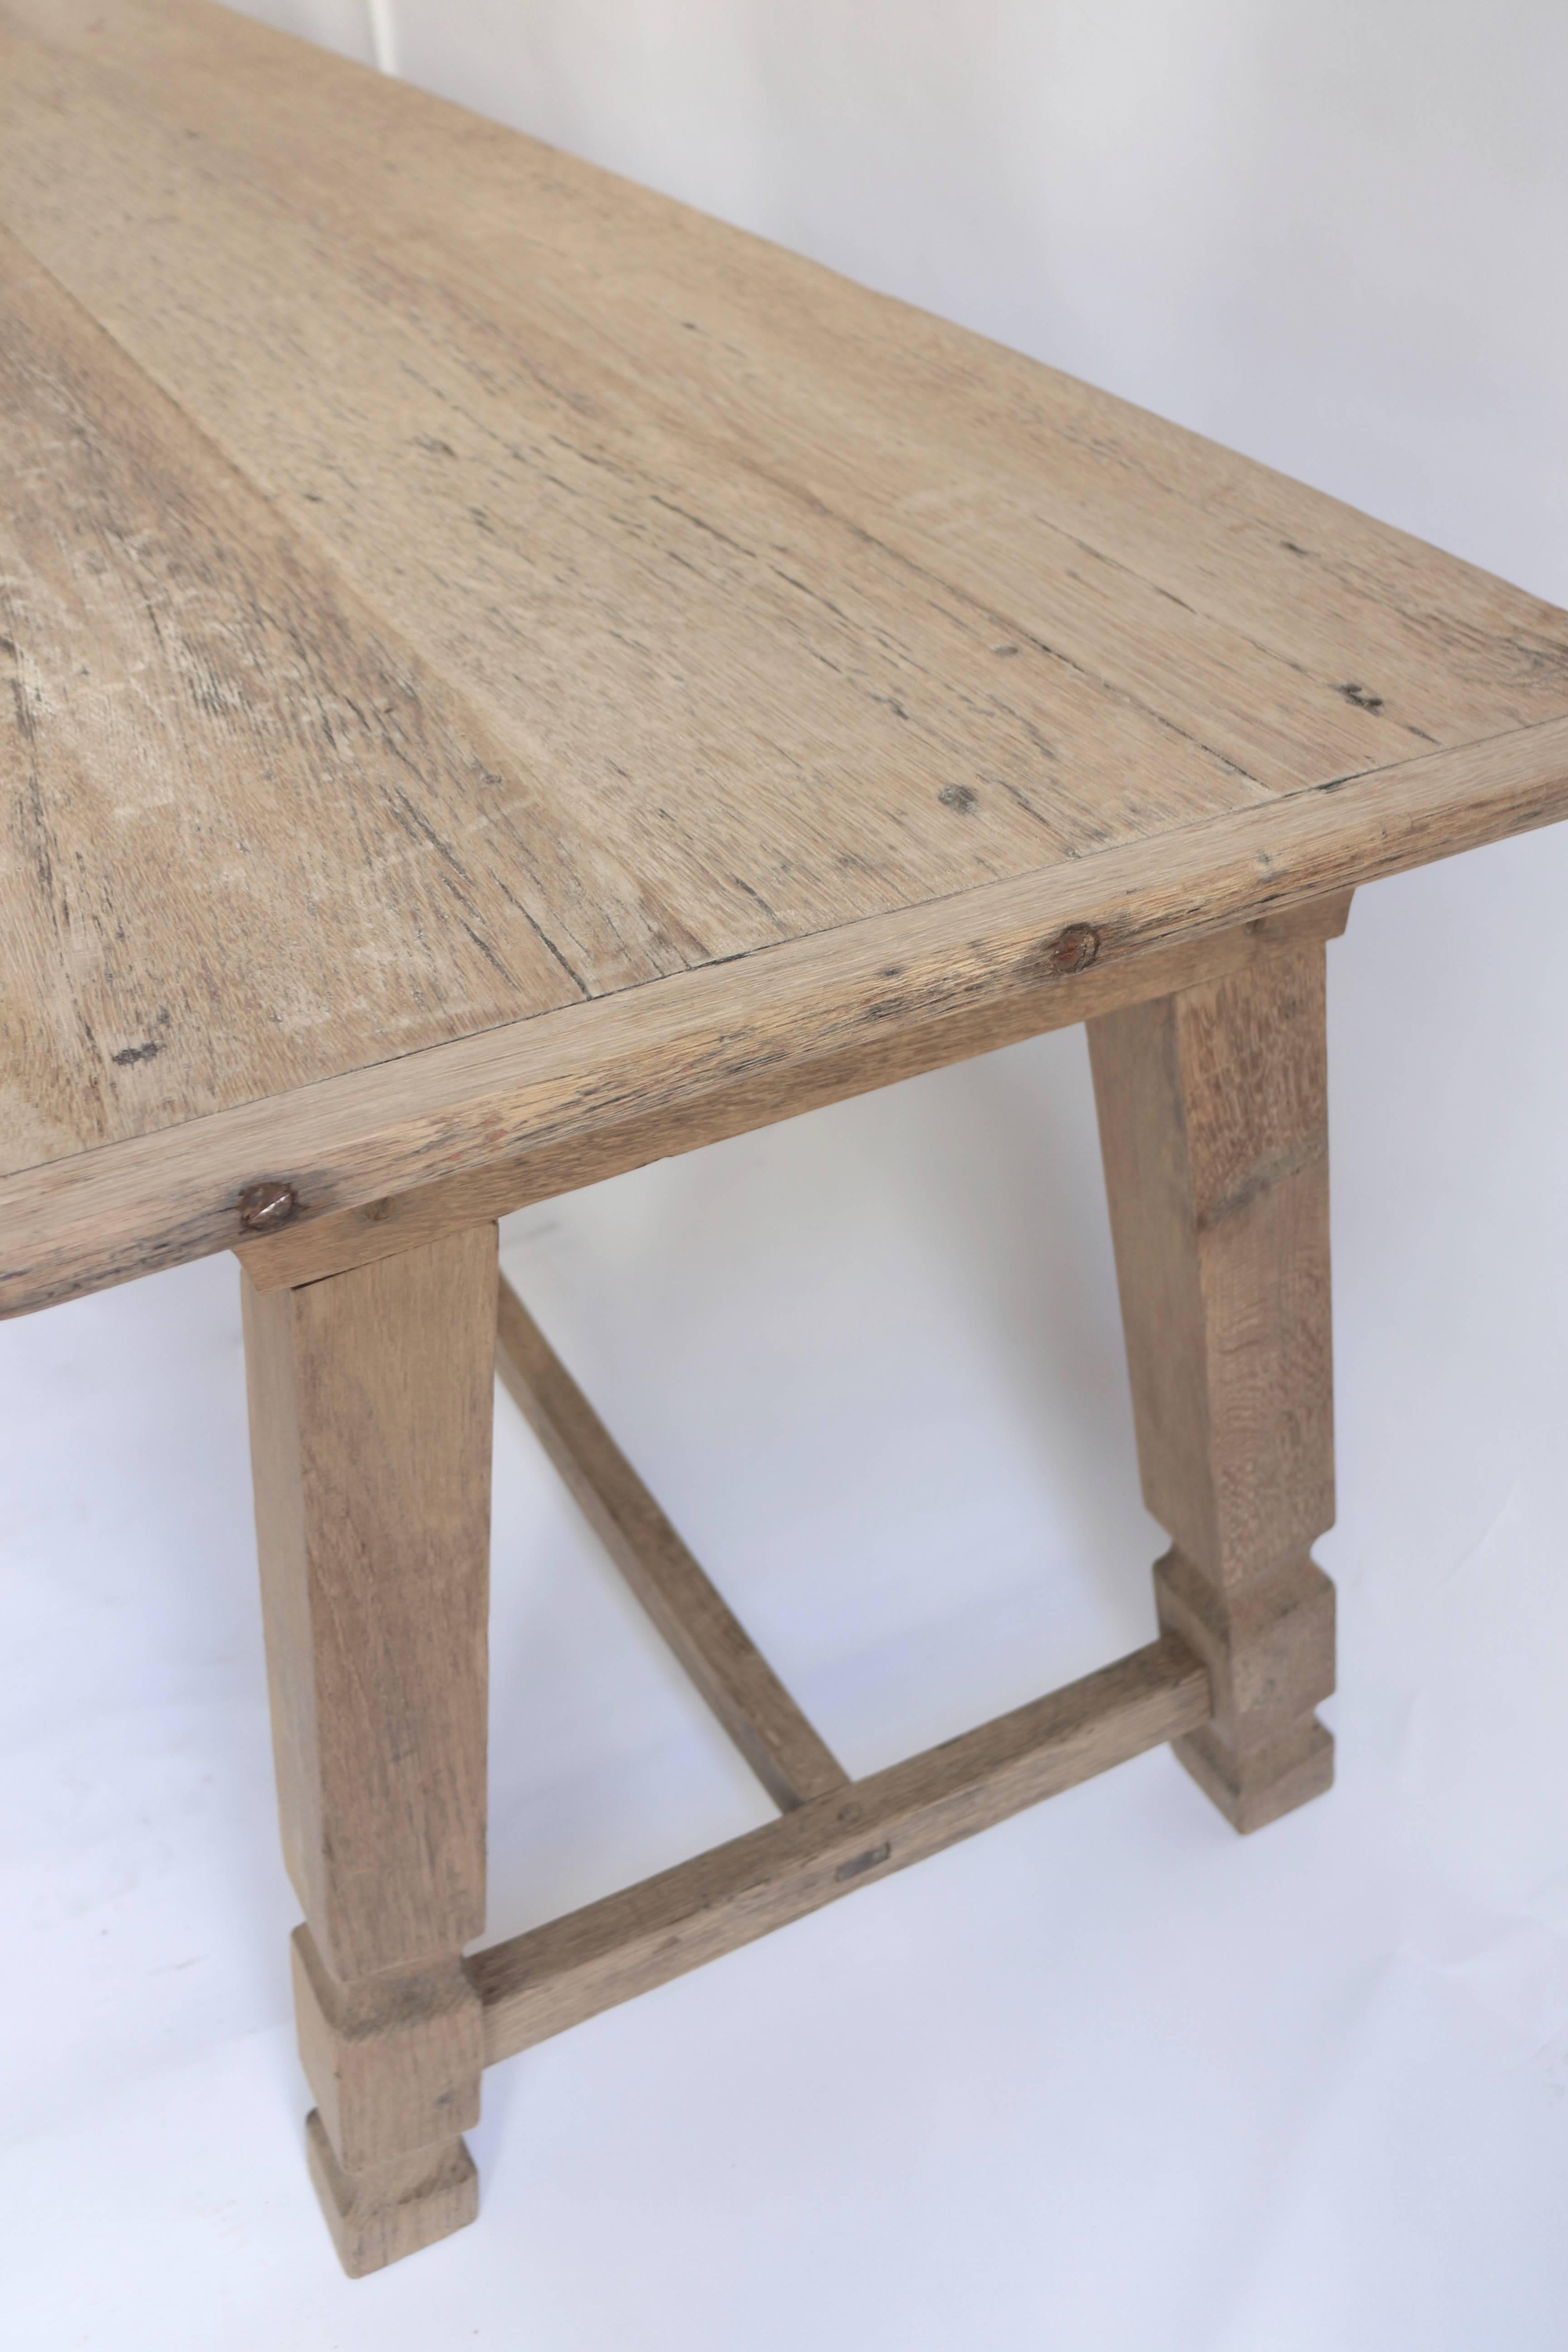 Site table in massive bleached oak, 
French, late 19th century.
Very elegant and stabile construction
possible to use as a dining table.